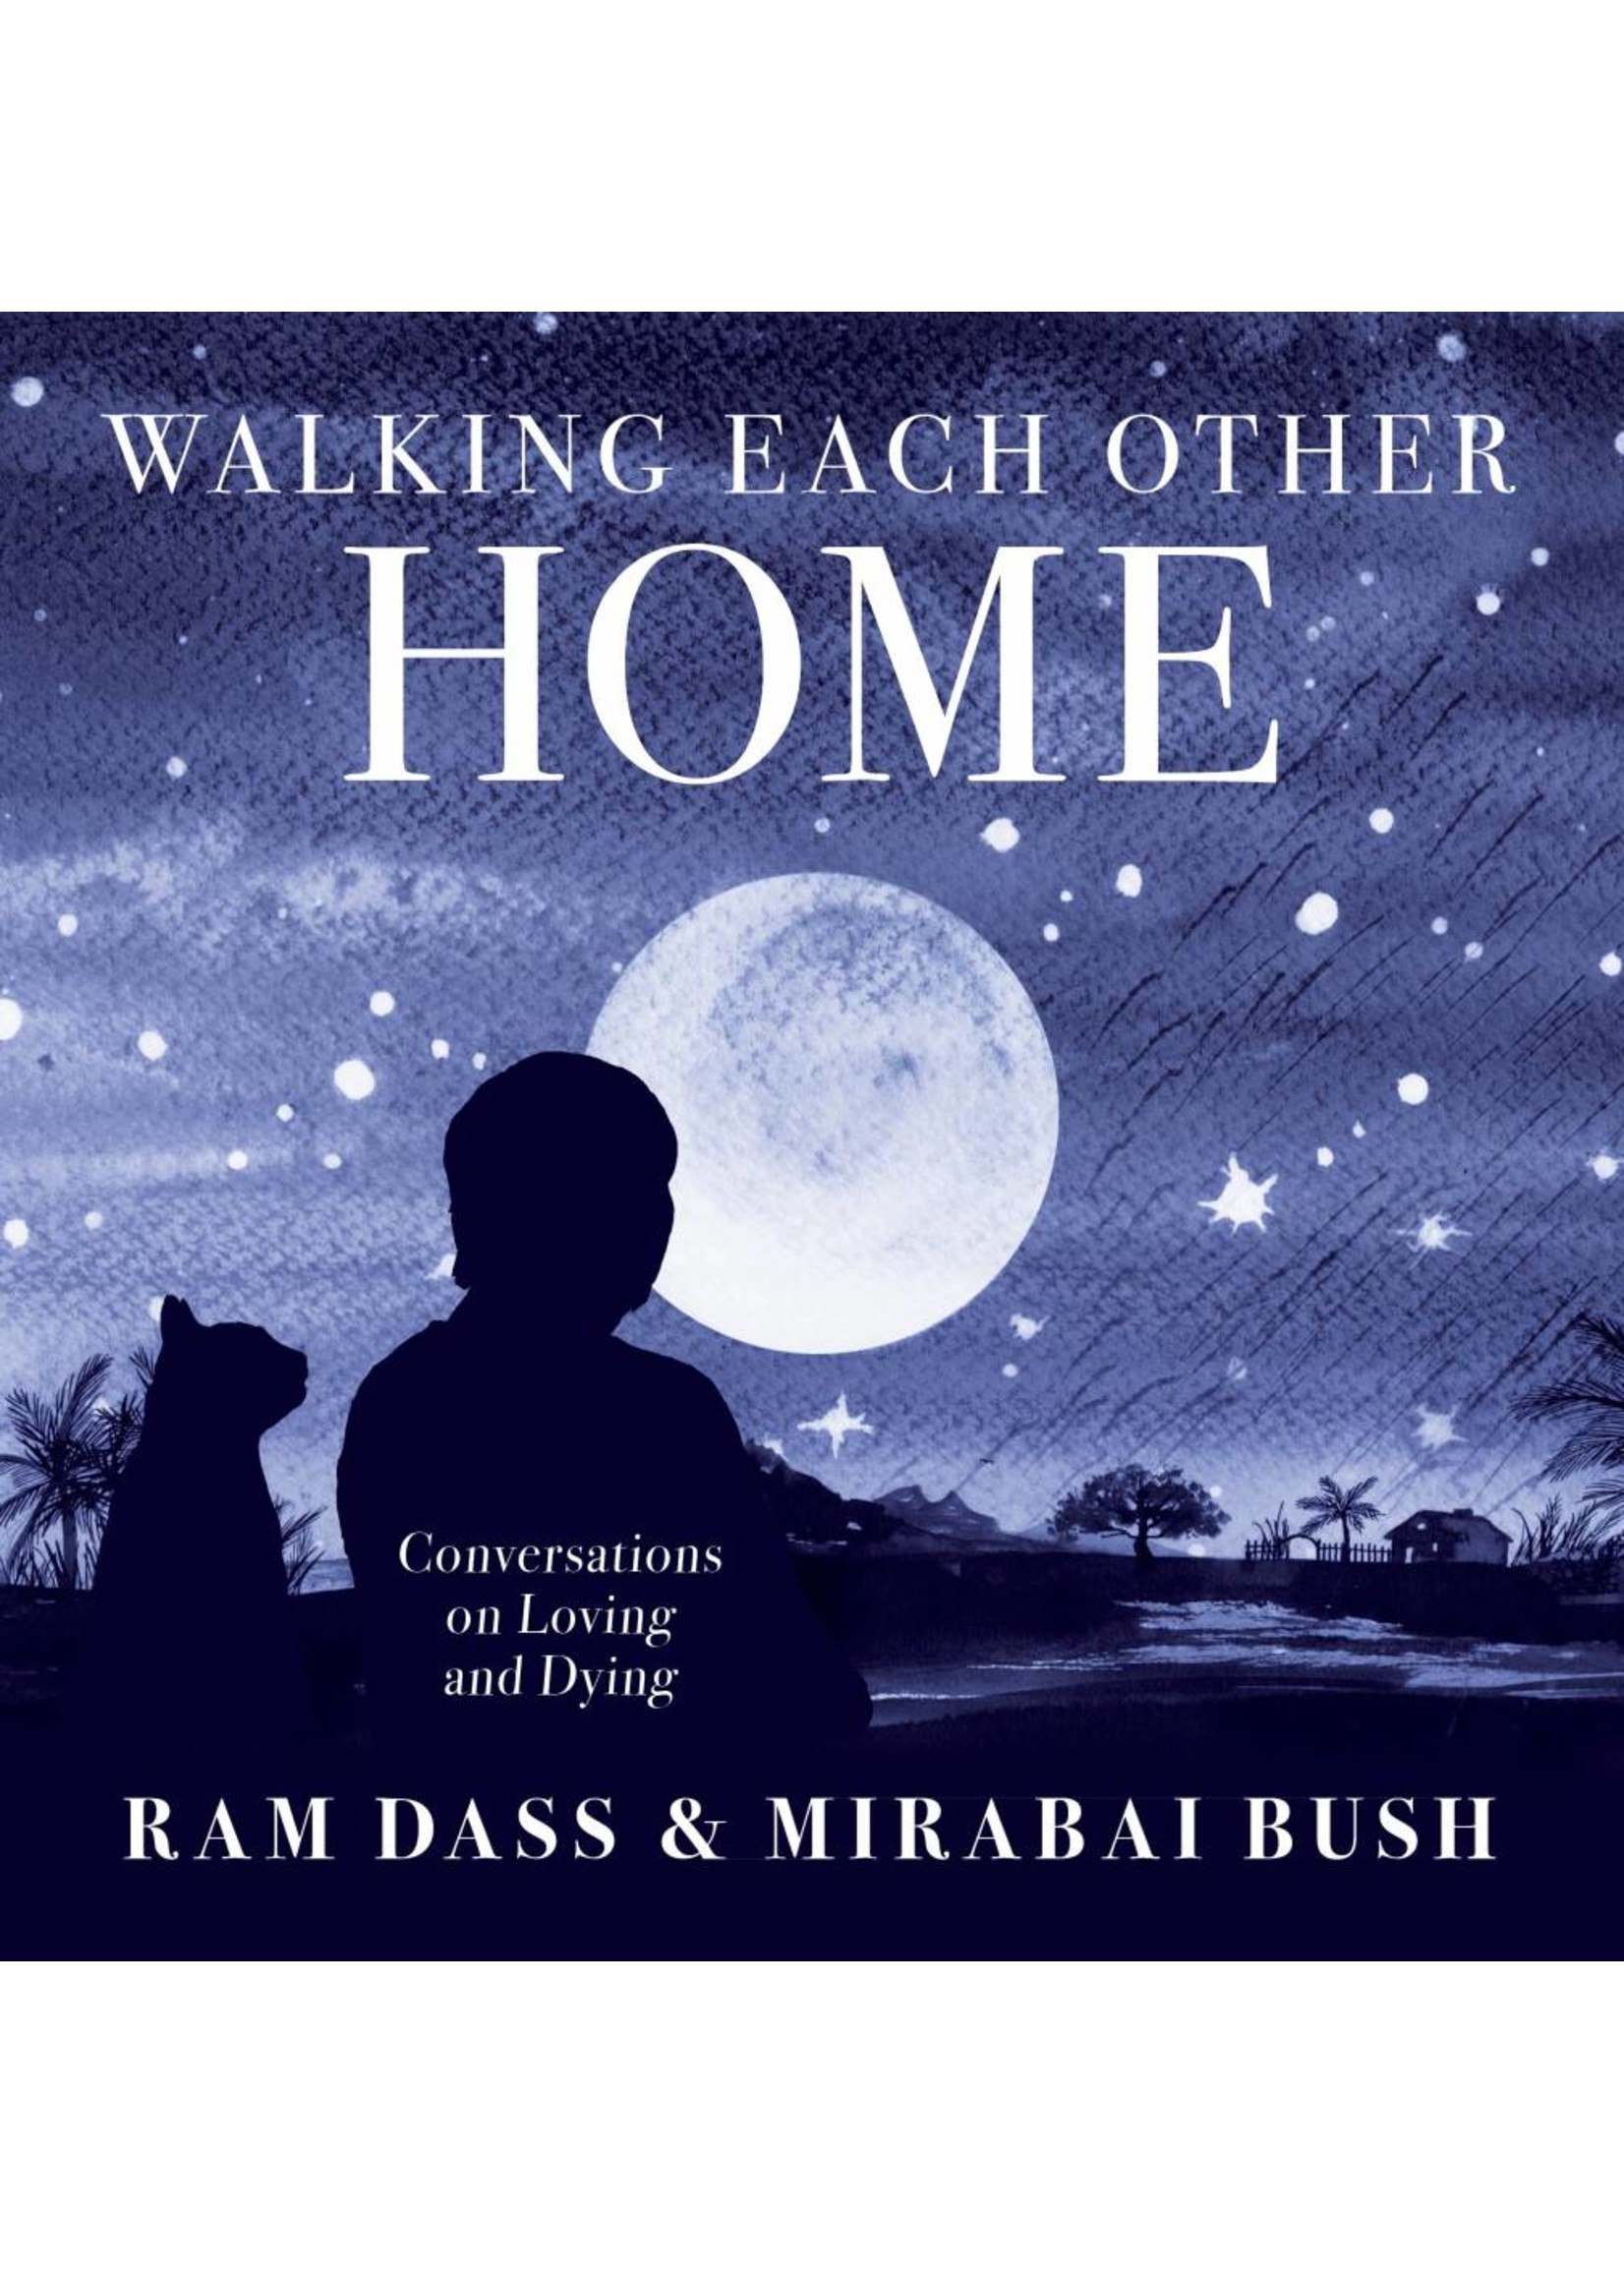 Walking Each Other Home | Conversations on Loving and Dying